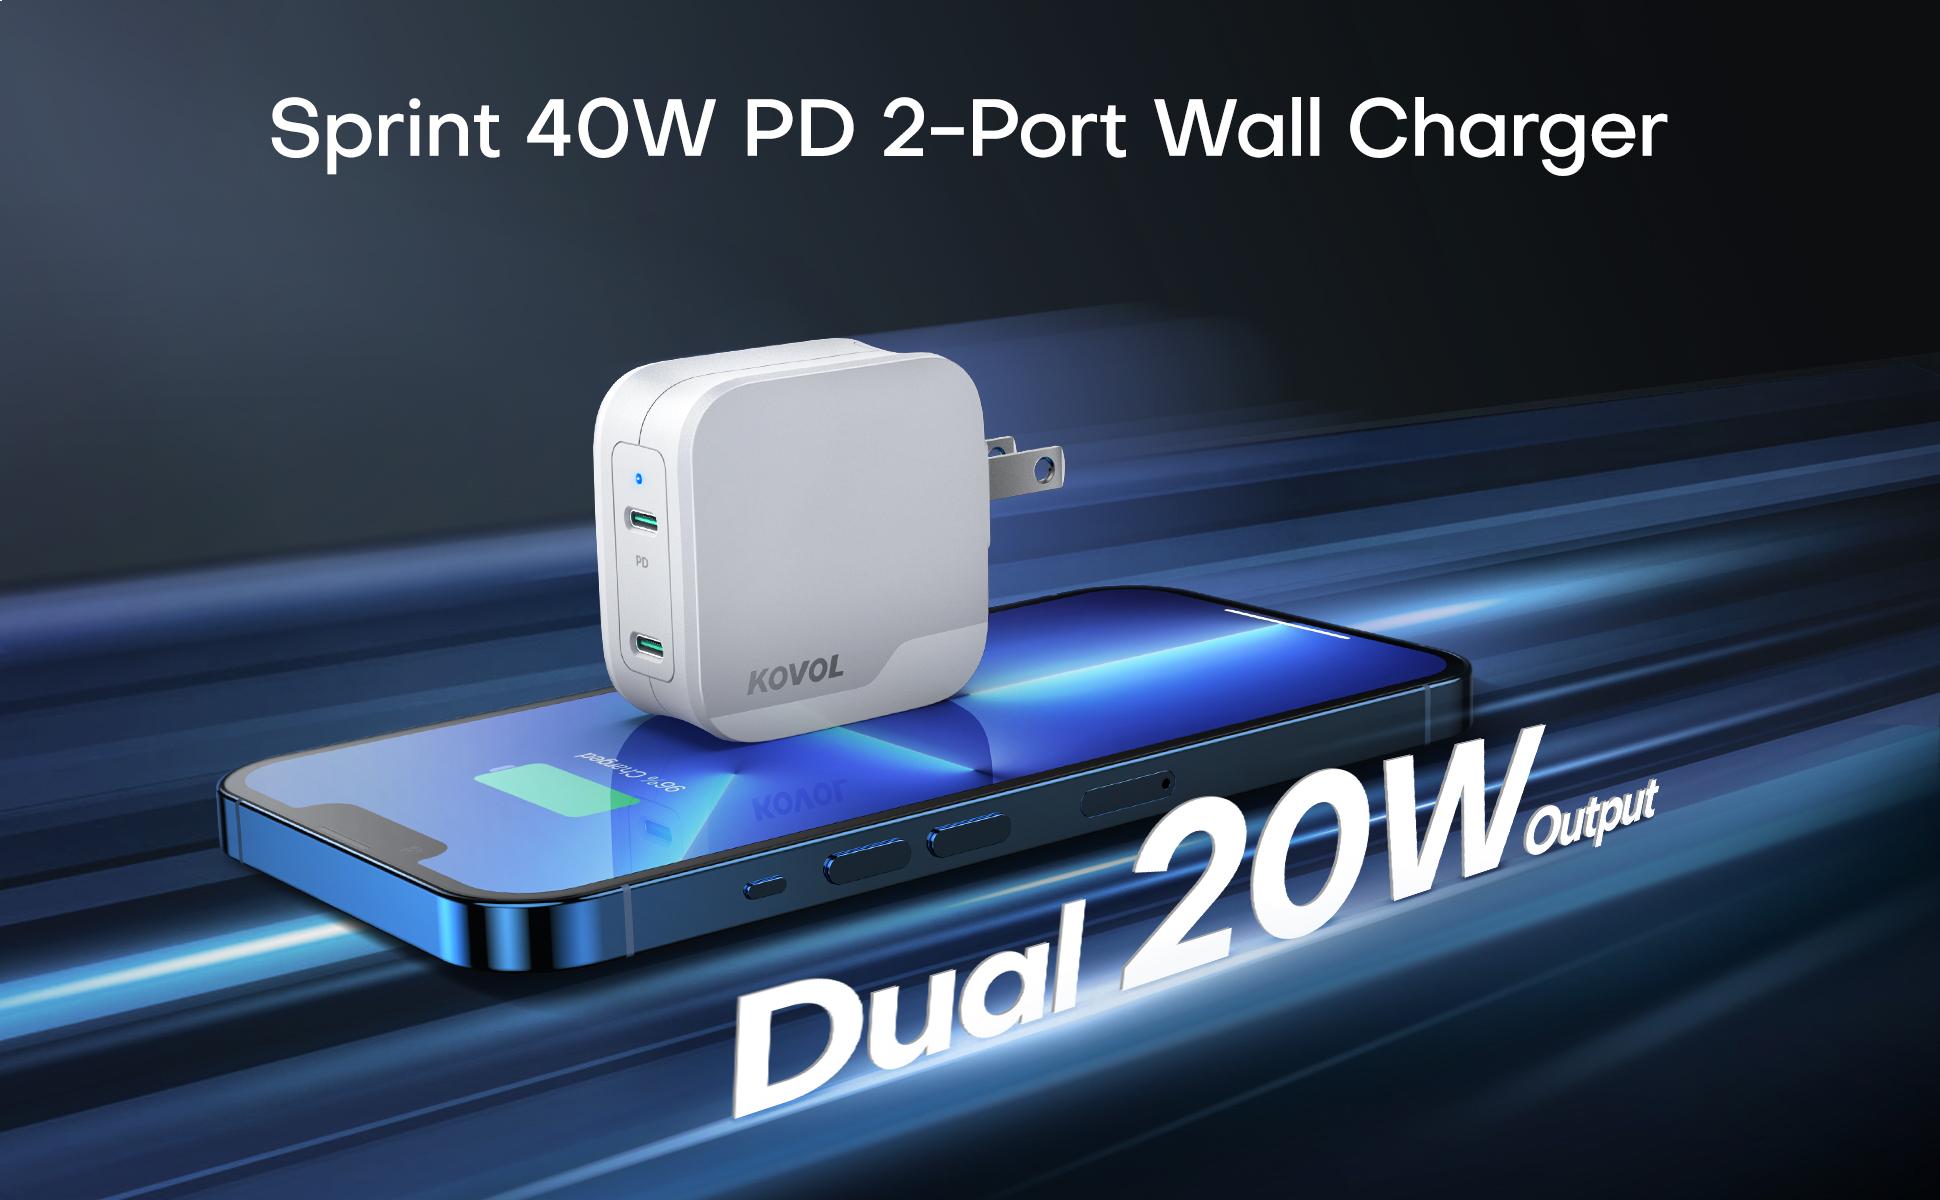 sprint 40w PD 2-port wall charger